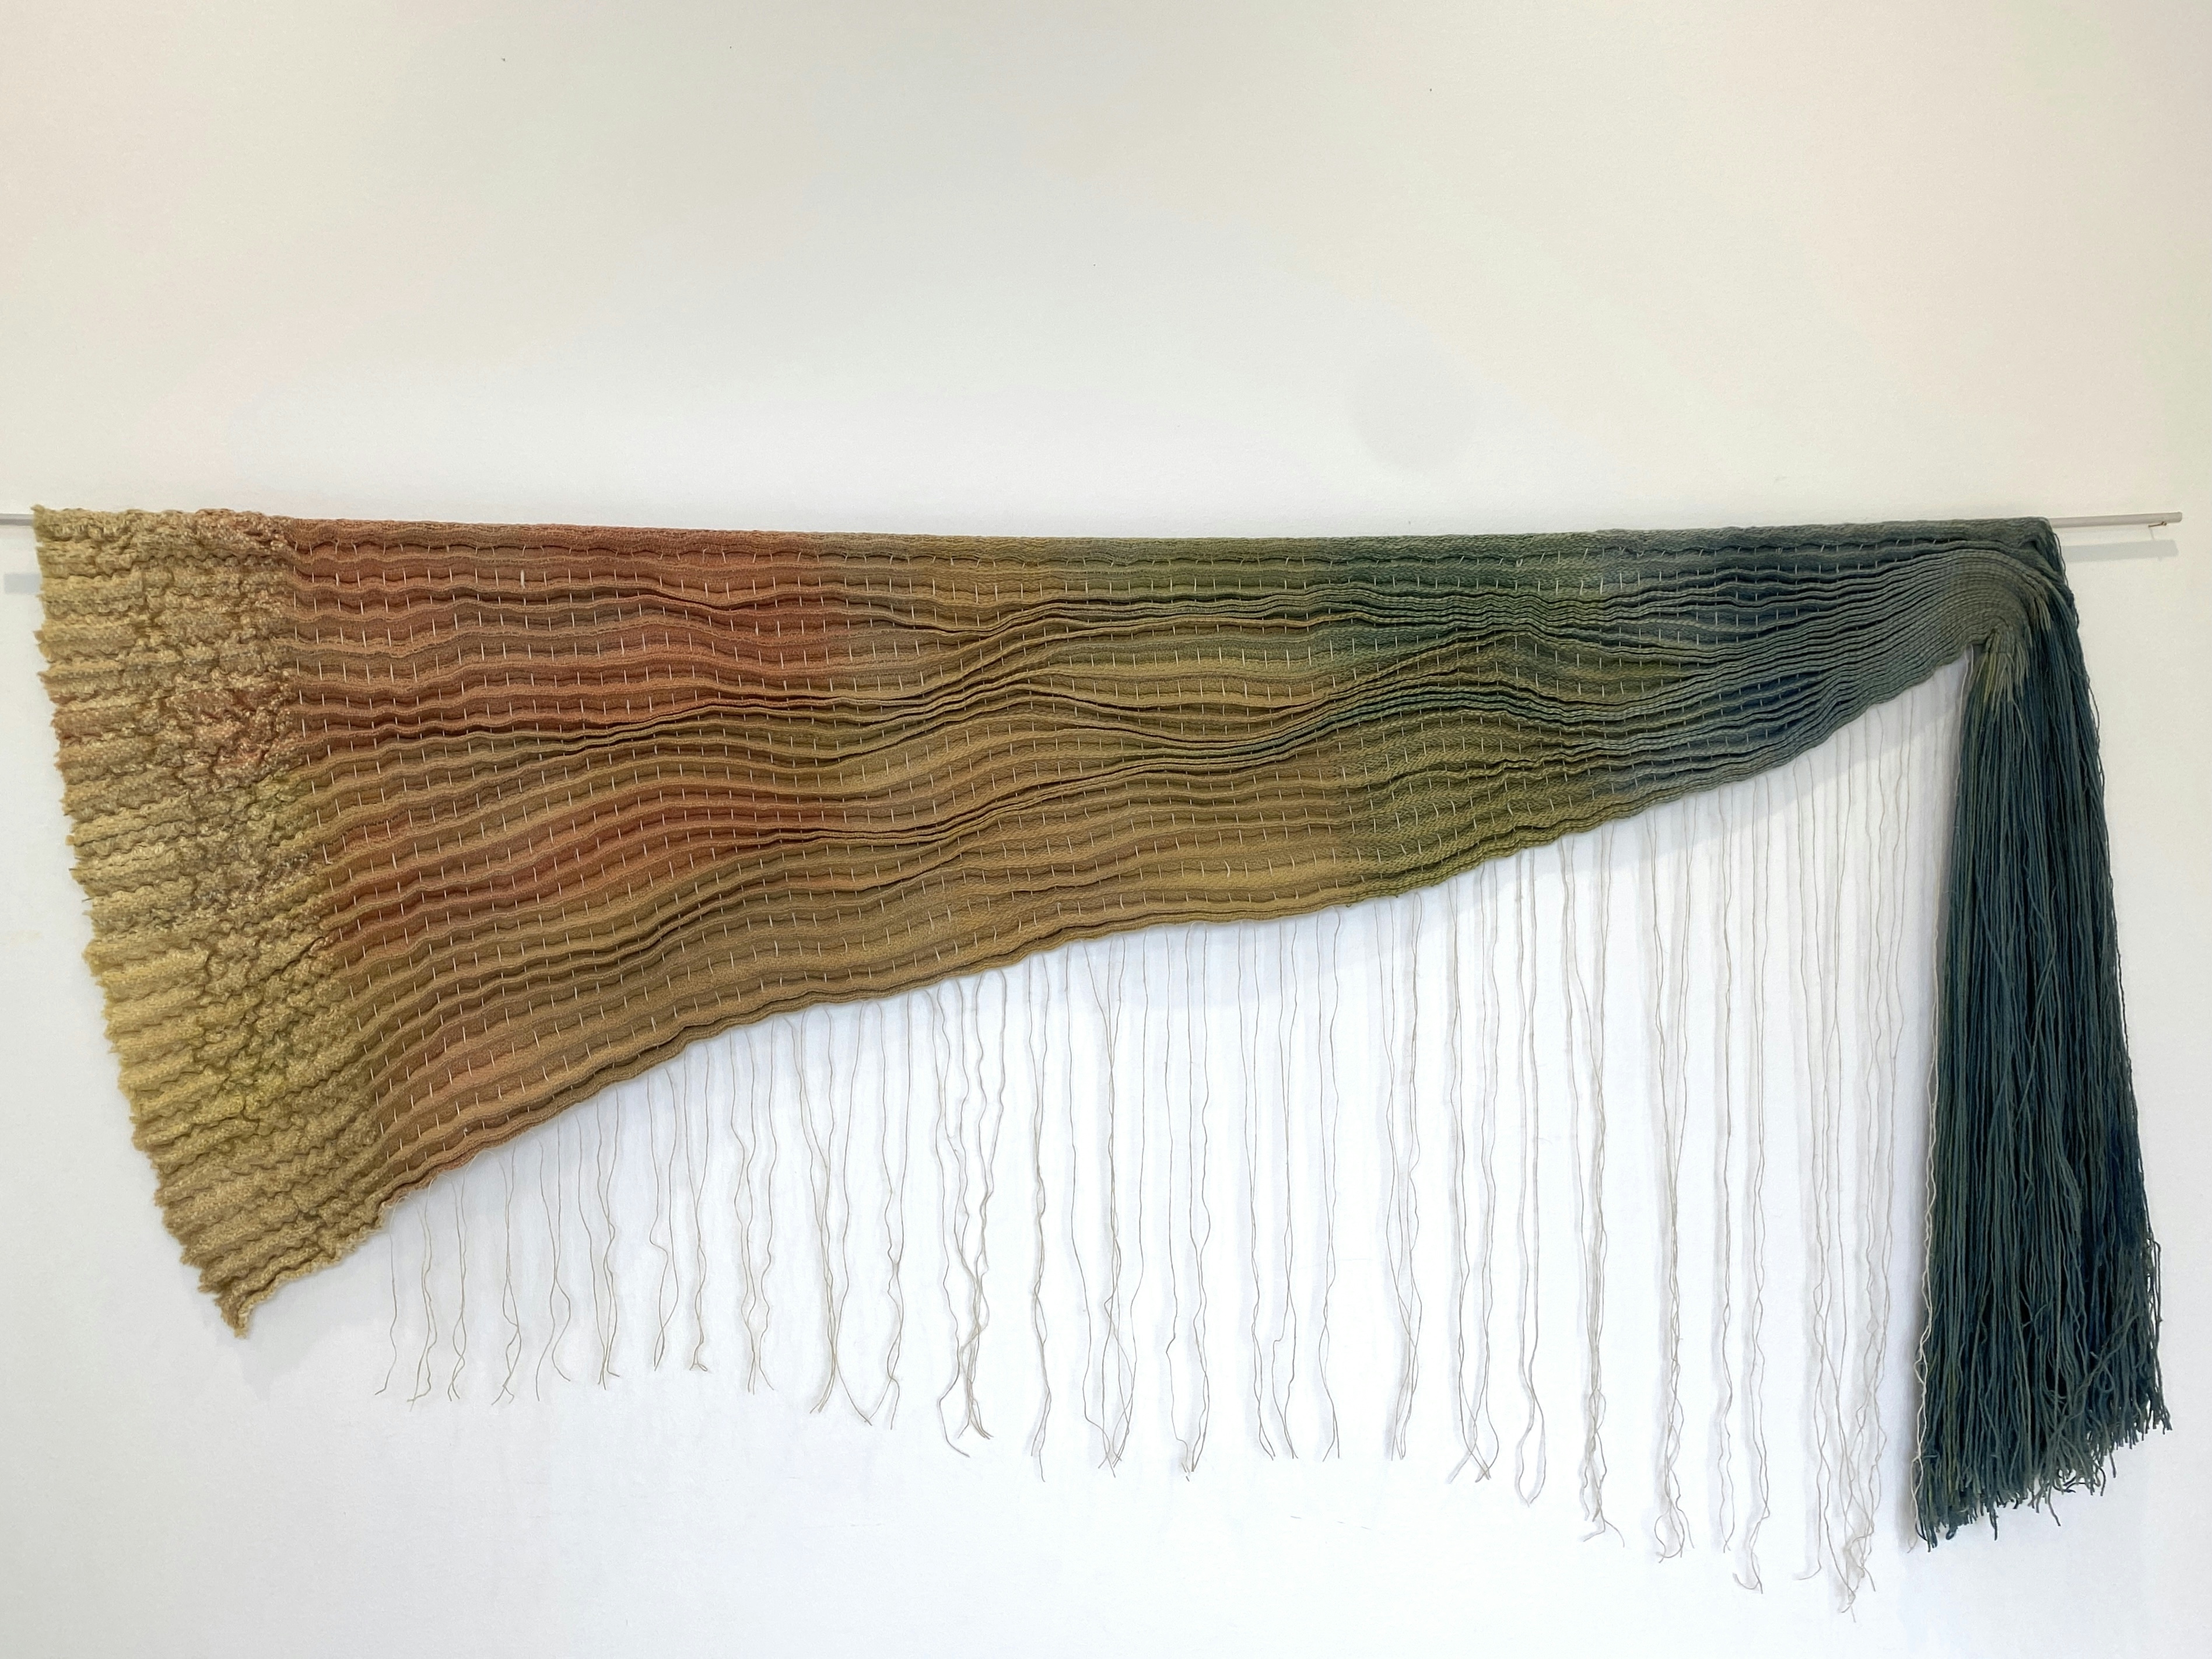 Time fades memories. 2021. Wool, natural dyes. Handwoven. 190 x 110 cm